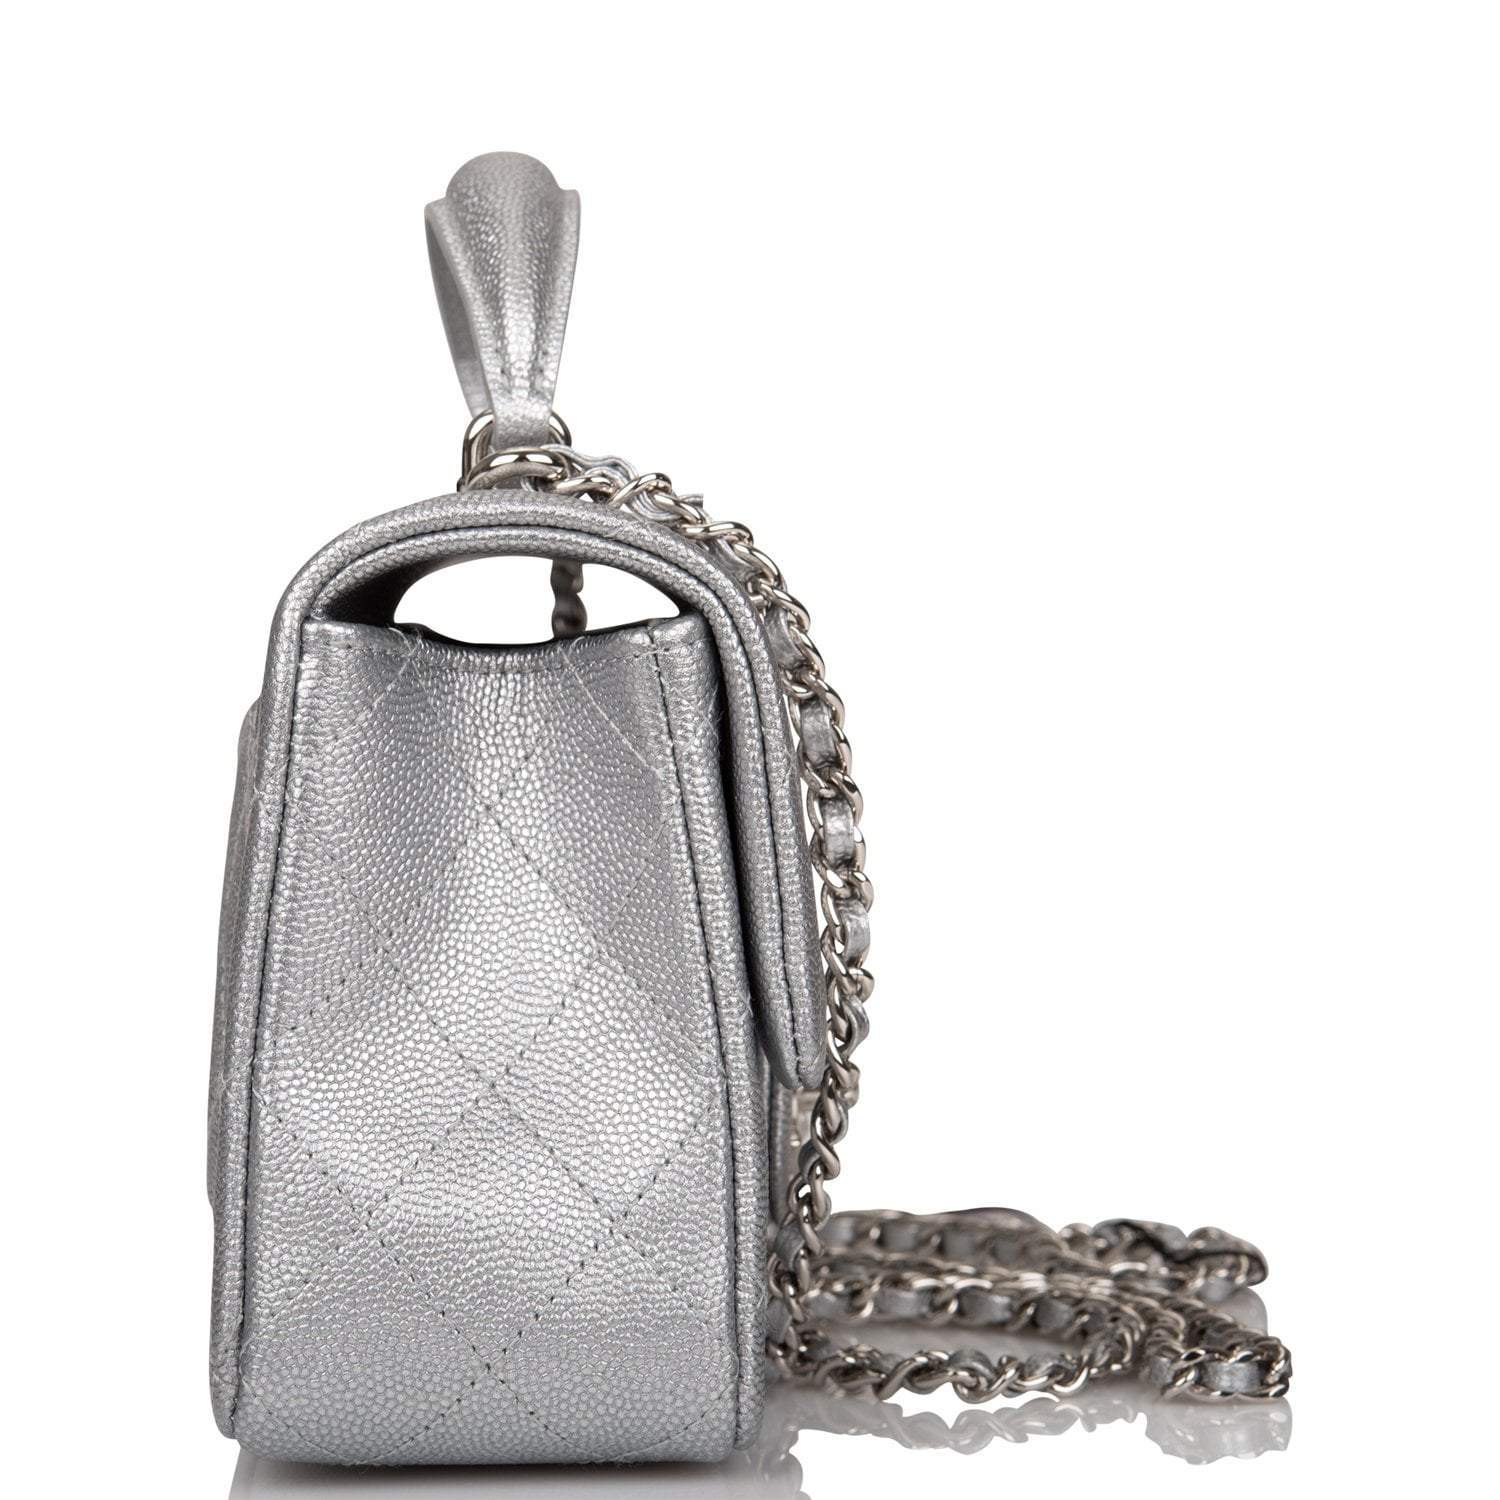 Chanel Silver Metallic Quilted Caviar Rectangular Mini Flap Bag with Top Handle Silver Hardware